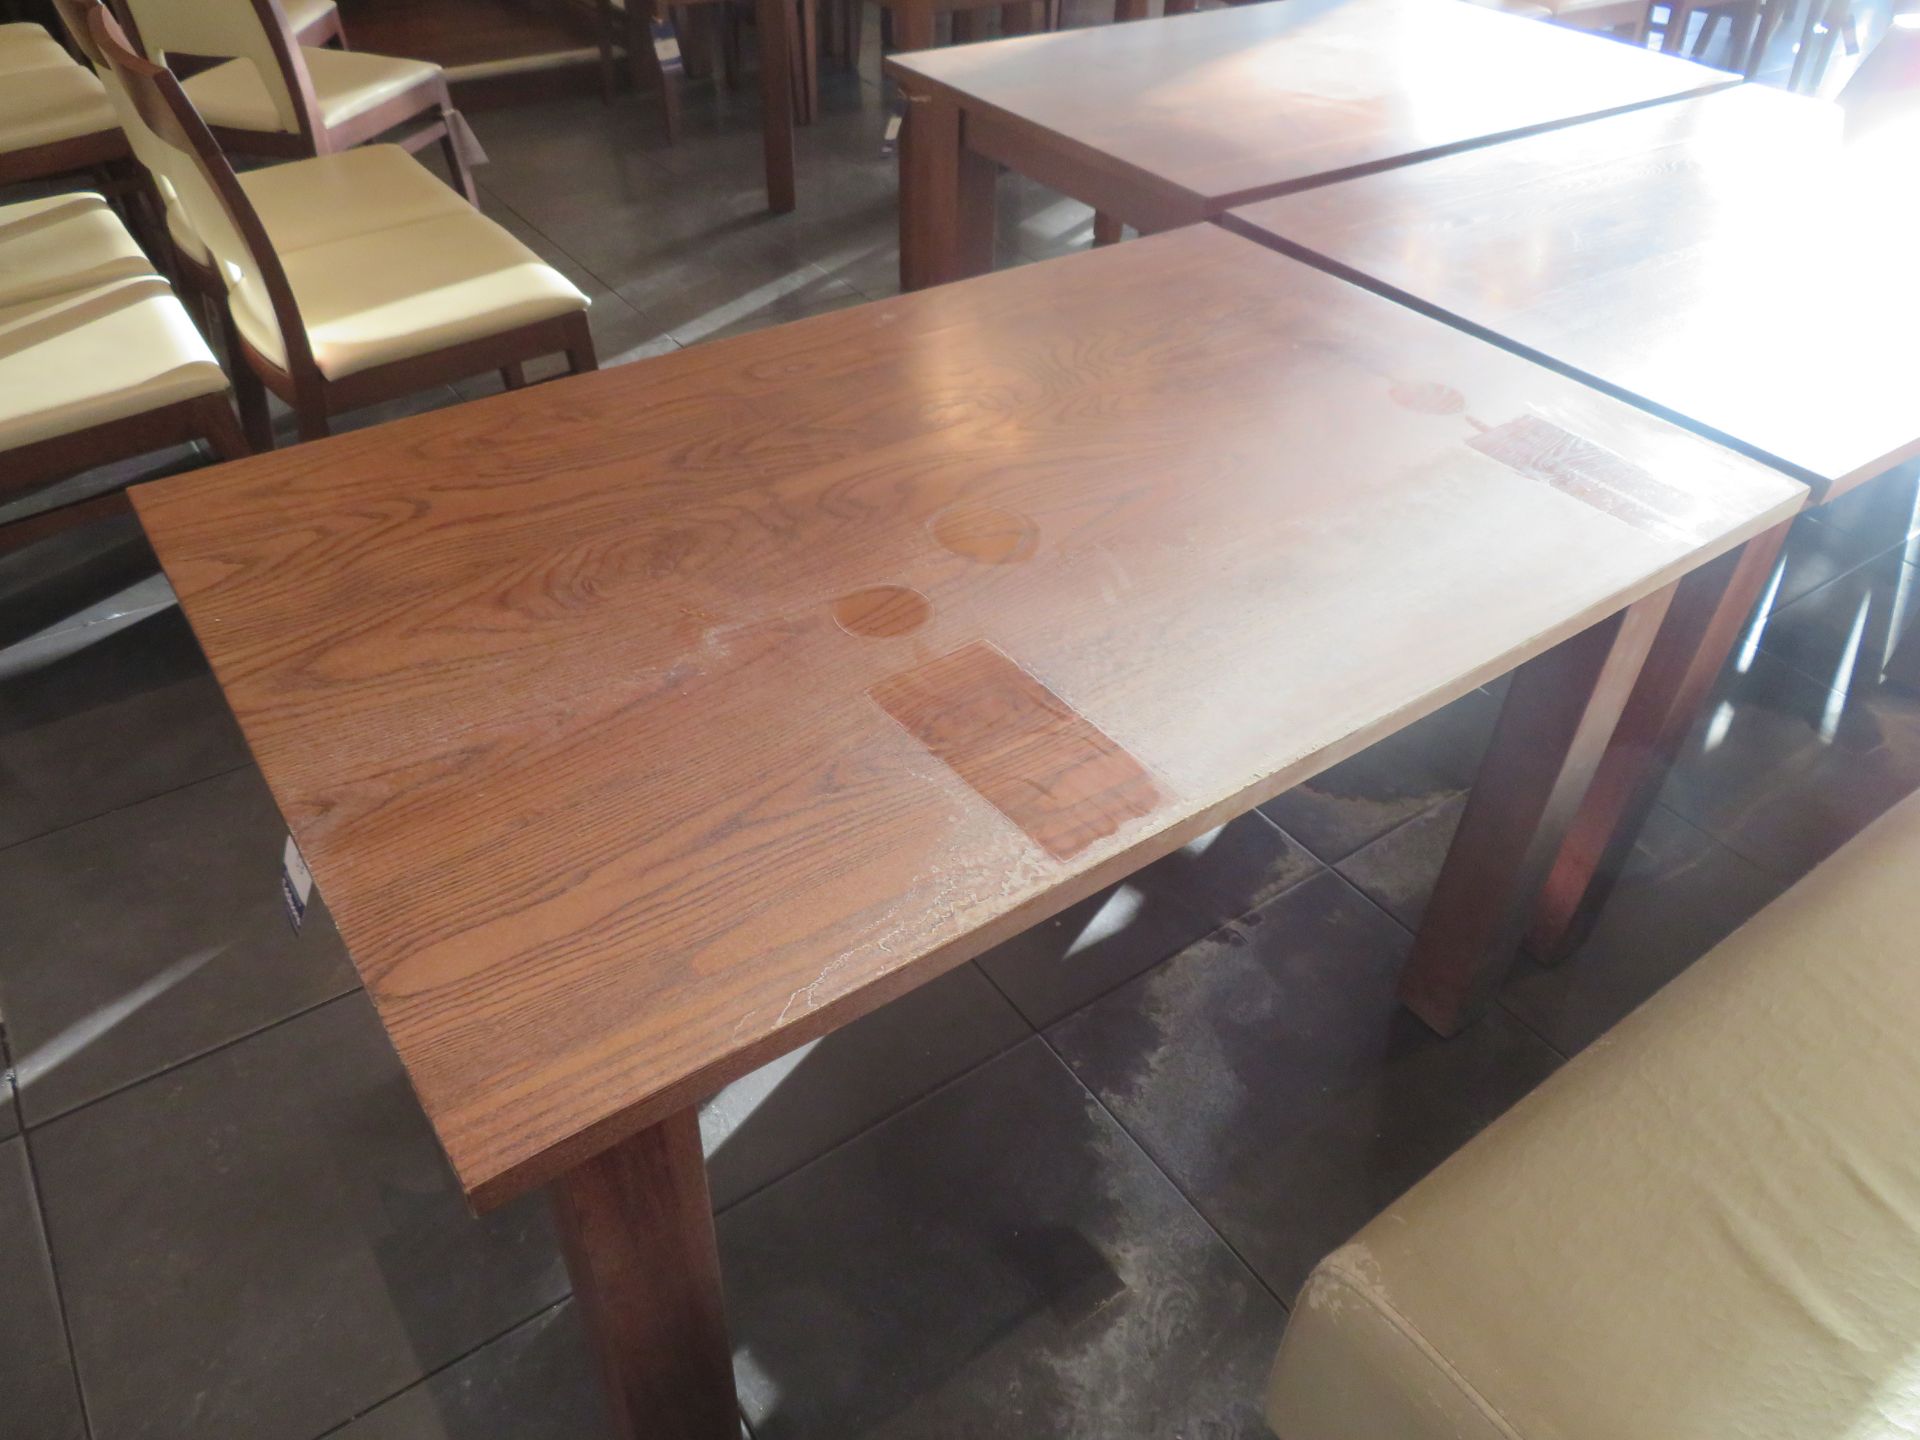 3 x Rectangular Dining Tables (1200 x760mm) - Image 2 of 3